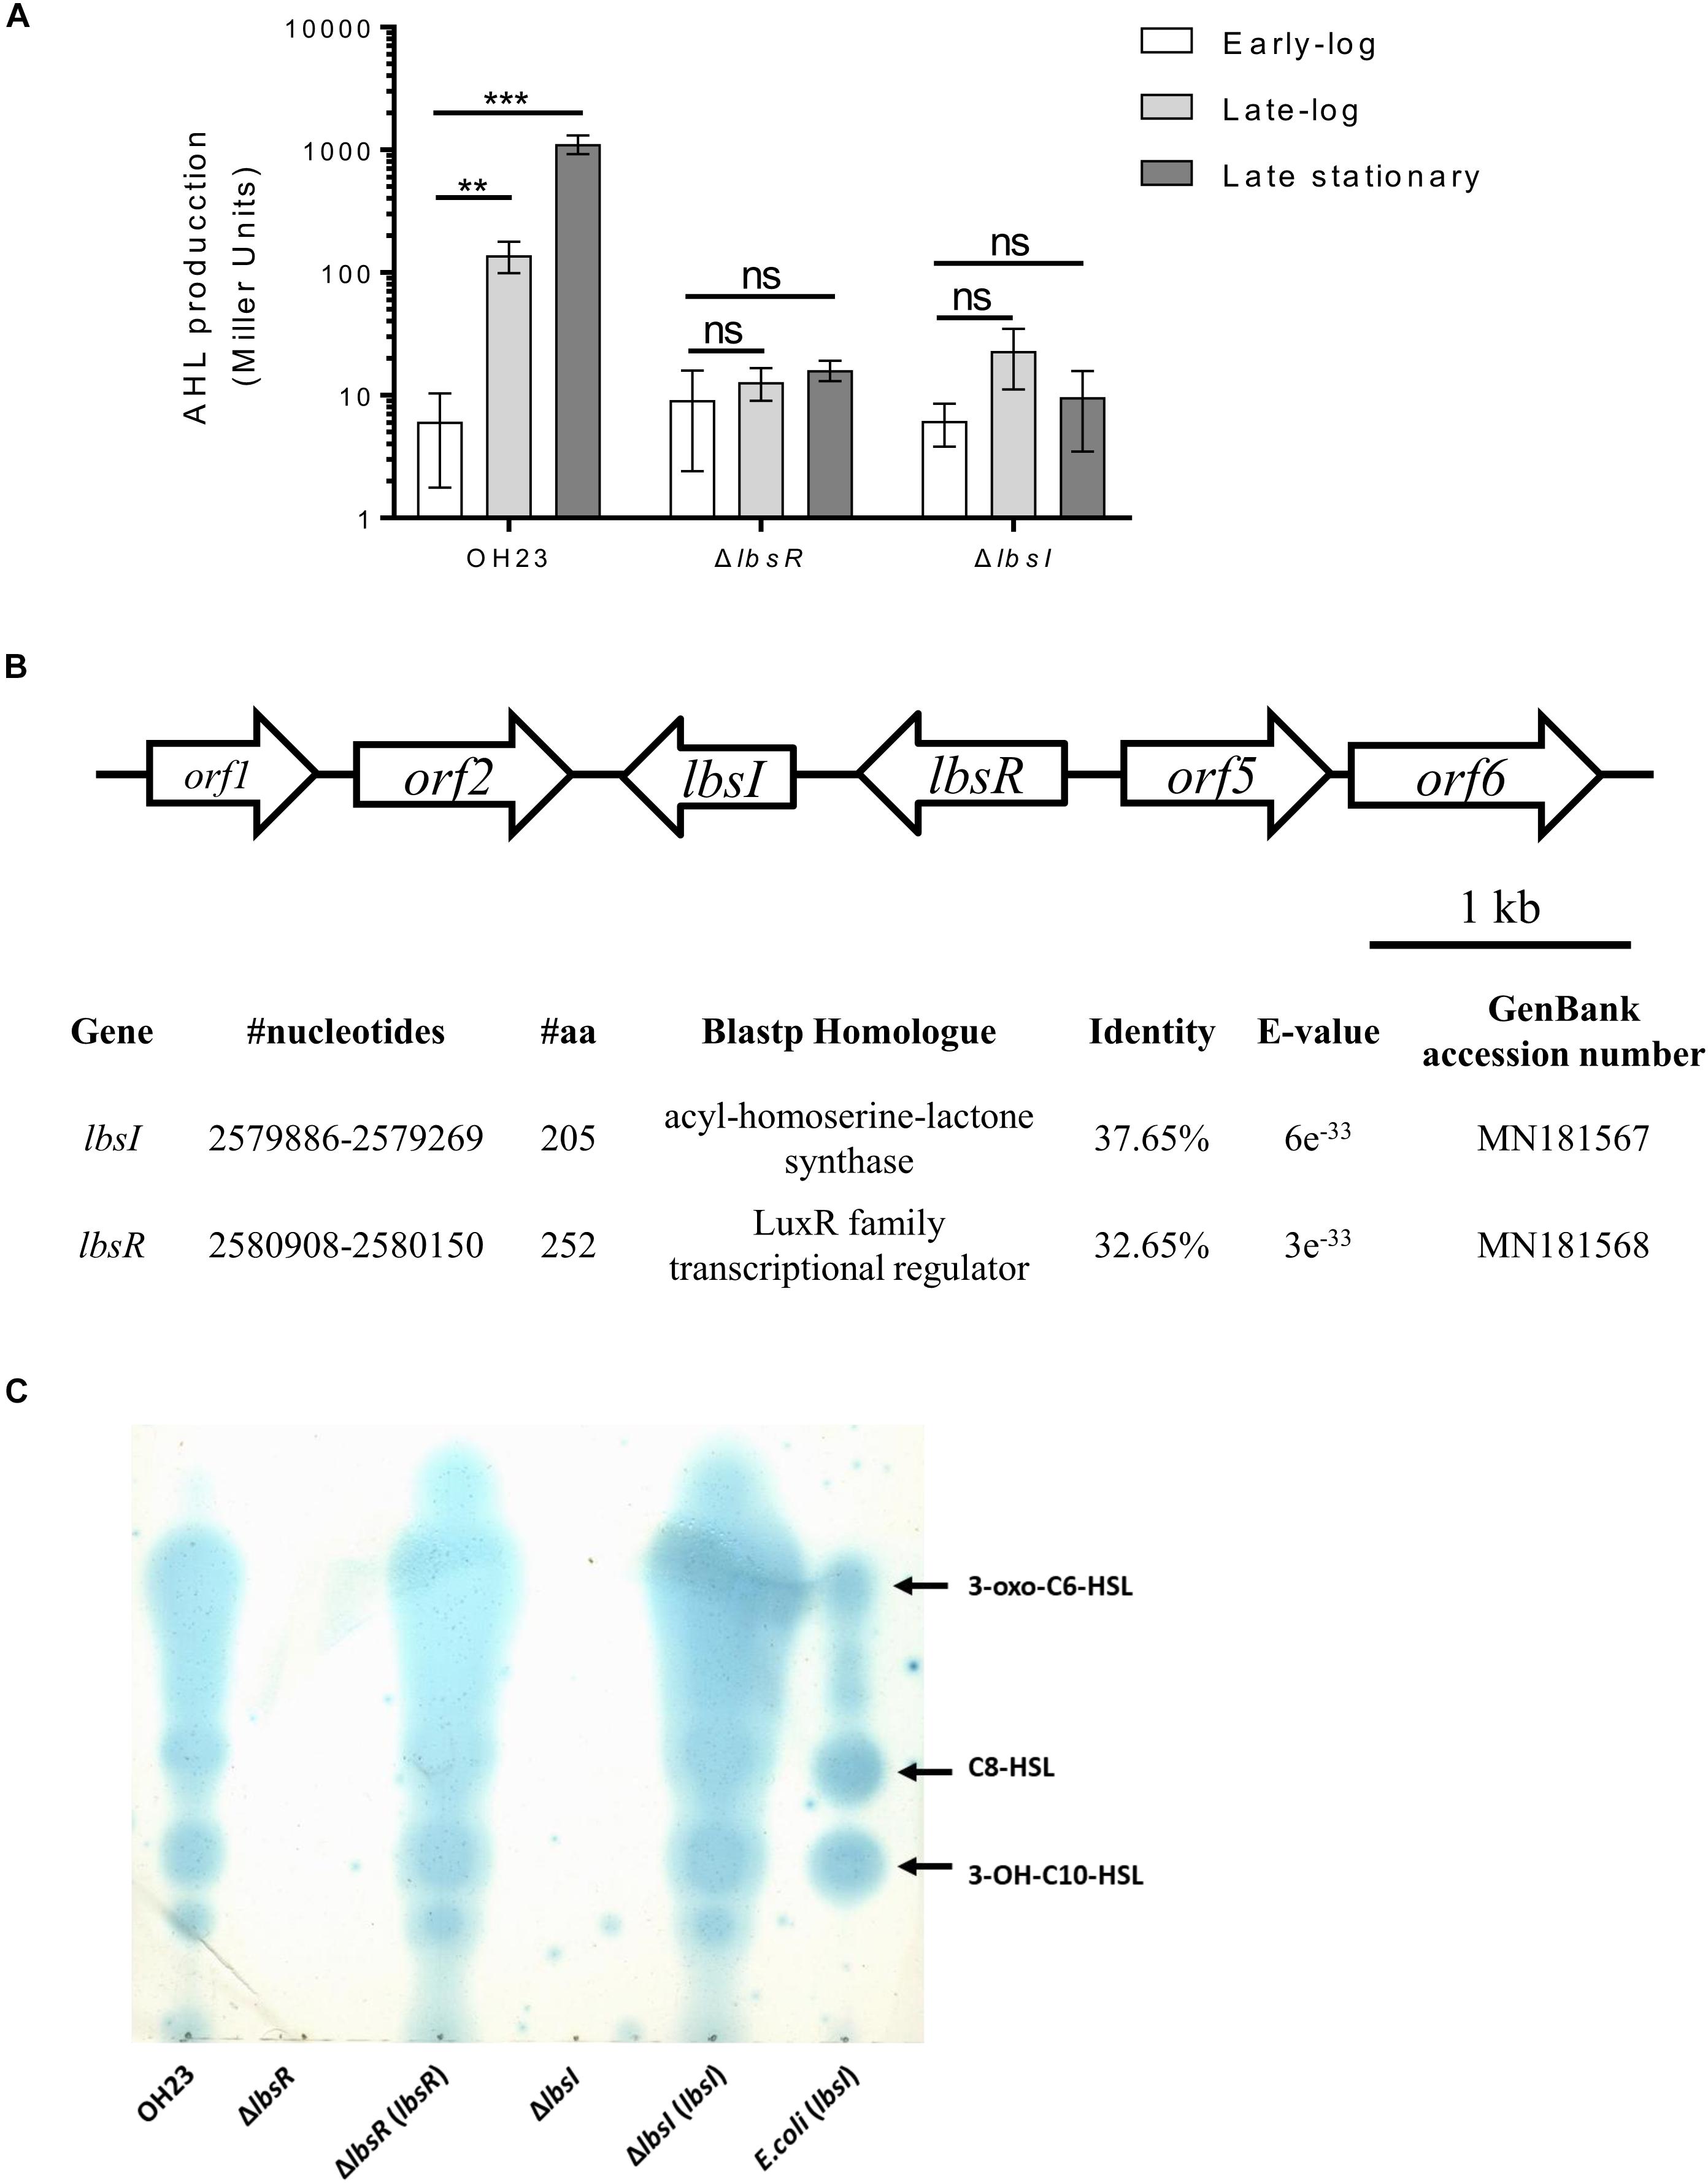 Frontiers The Ahl Quorum Sensing System Negatively Regulates Growth And Autolysis In Lysobacter Brunescens Microbiology